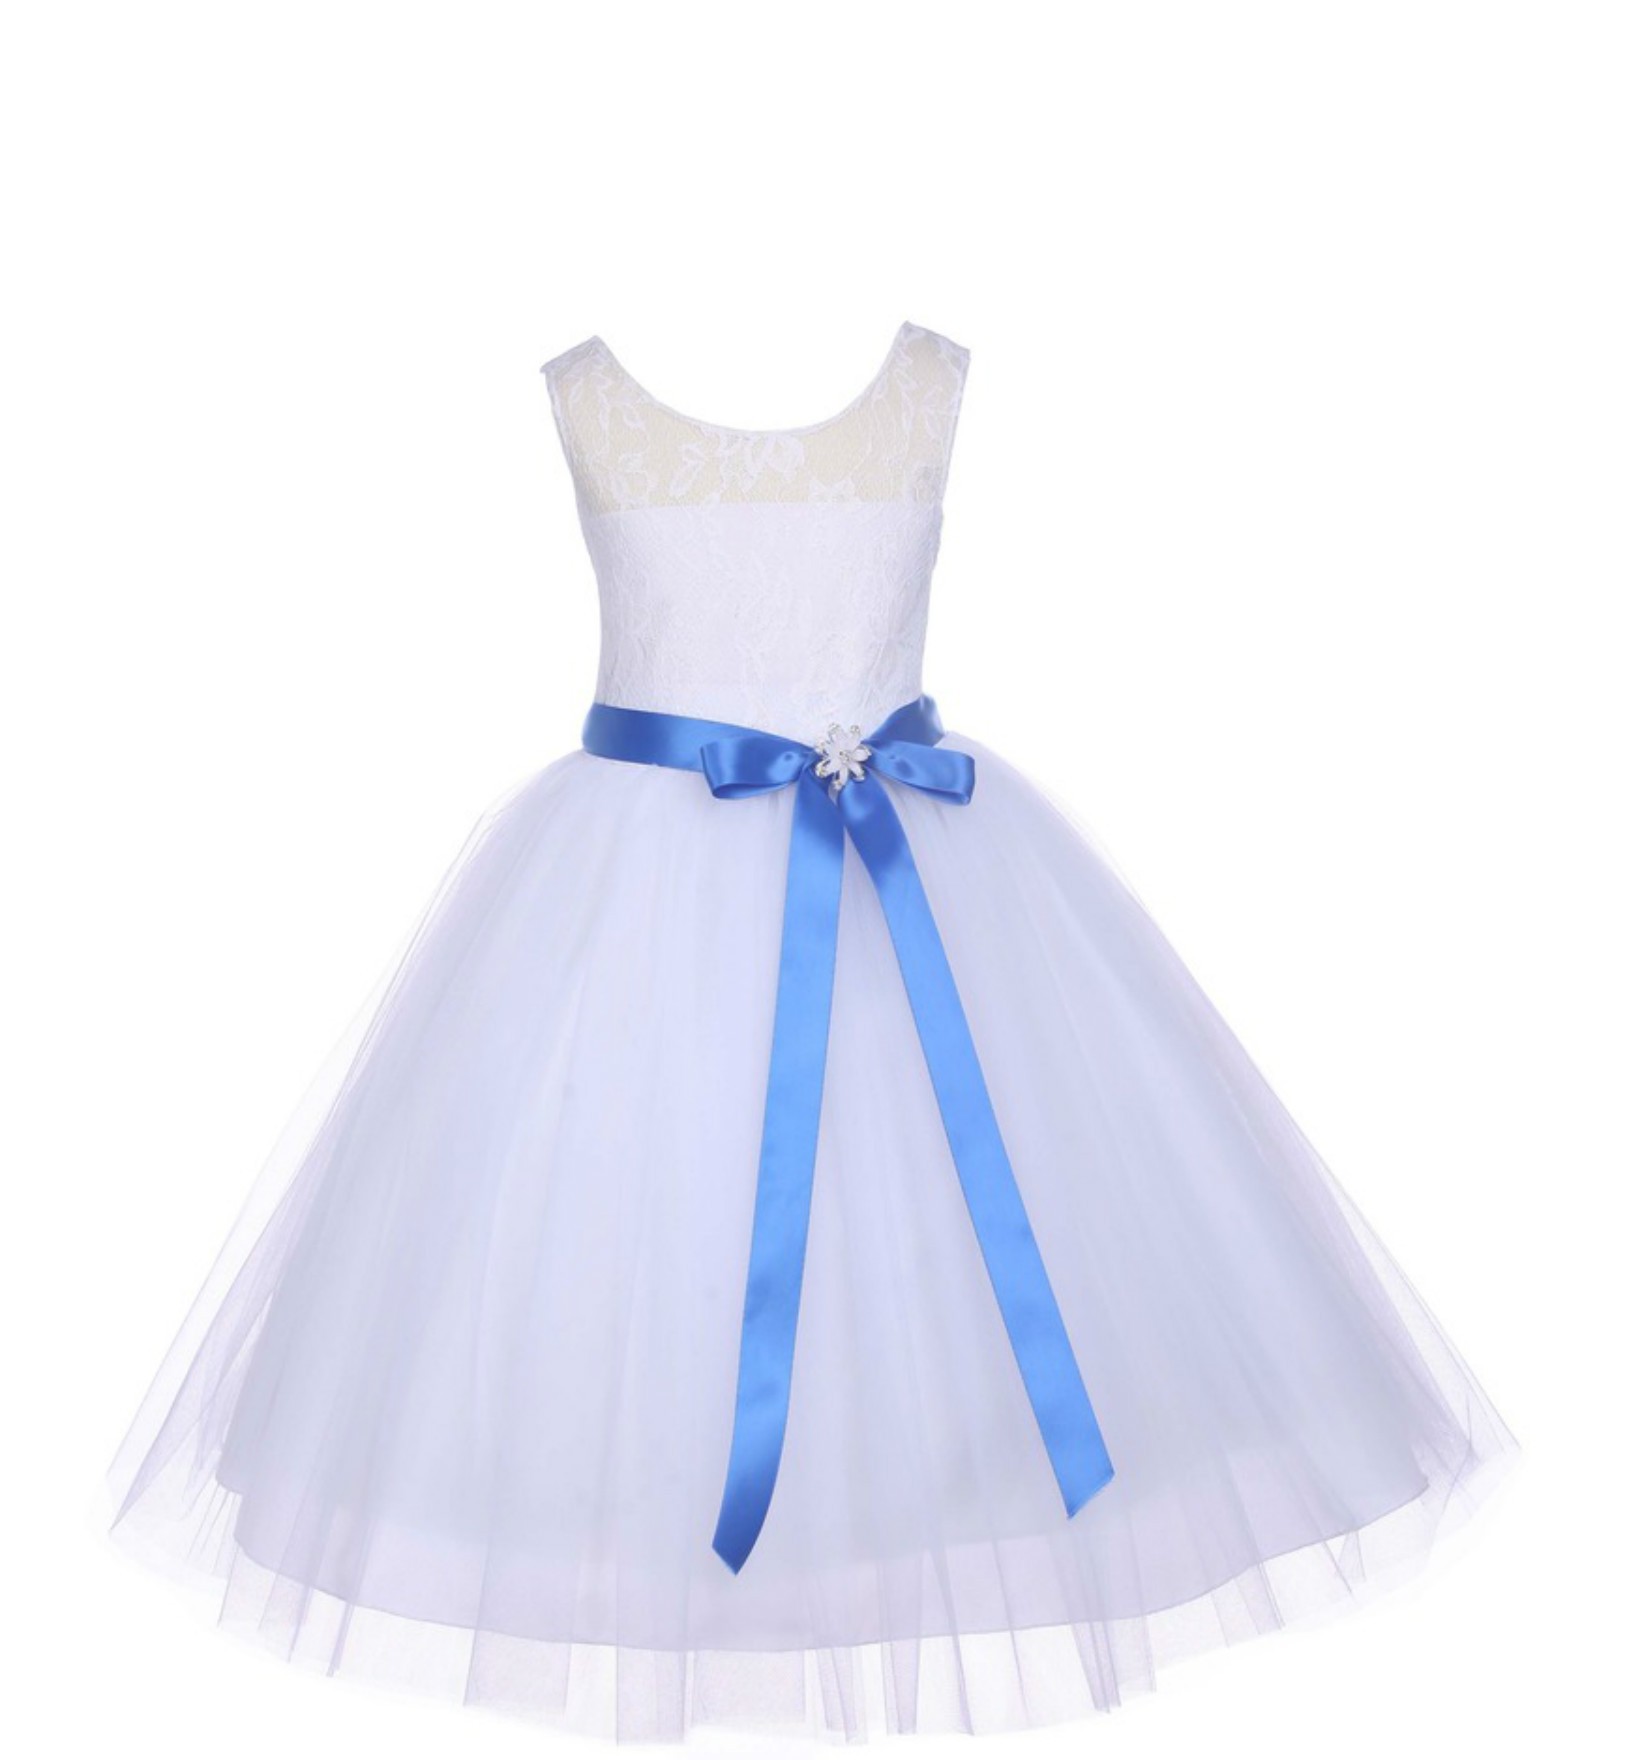 White Floral Lace Bodice Tulle Royal Blue Ribbon Flower Girl Dress 153R